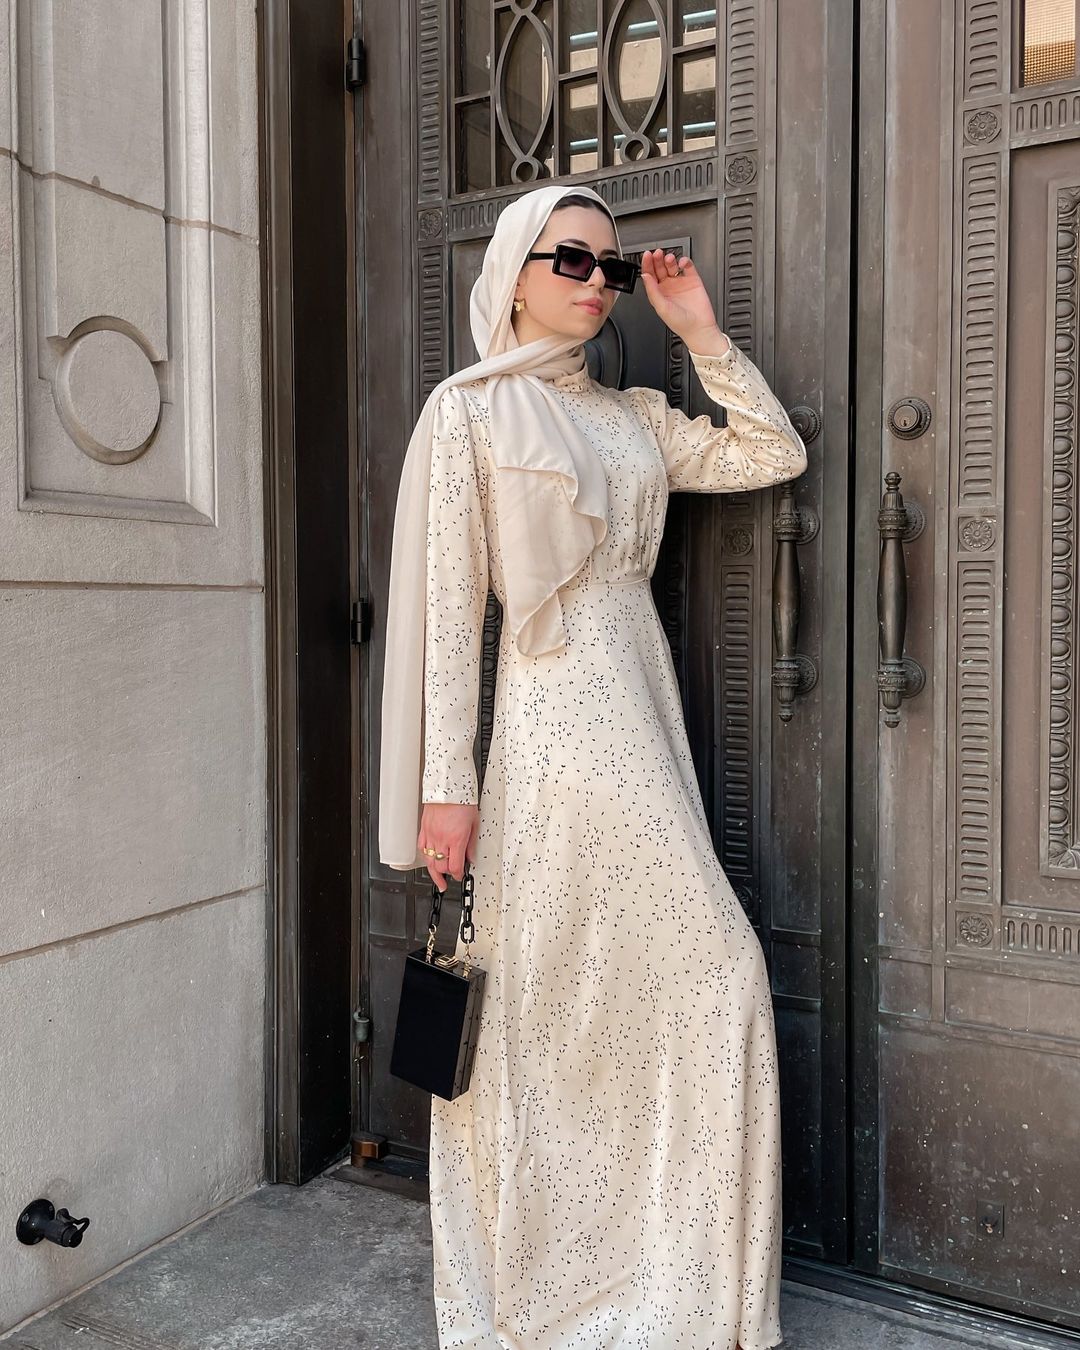 Stylish Hijab Wedding Guest Outfit Ideas You Should Try This Autumn